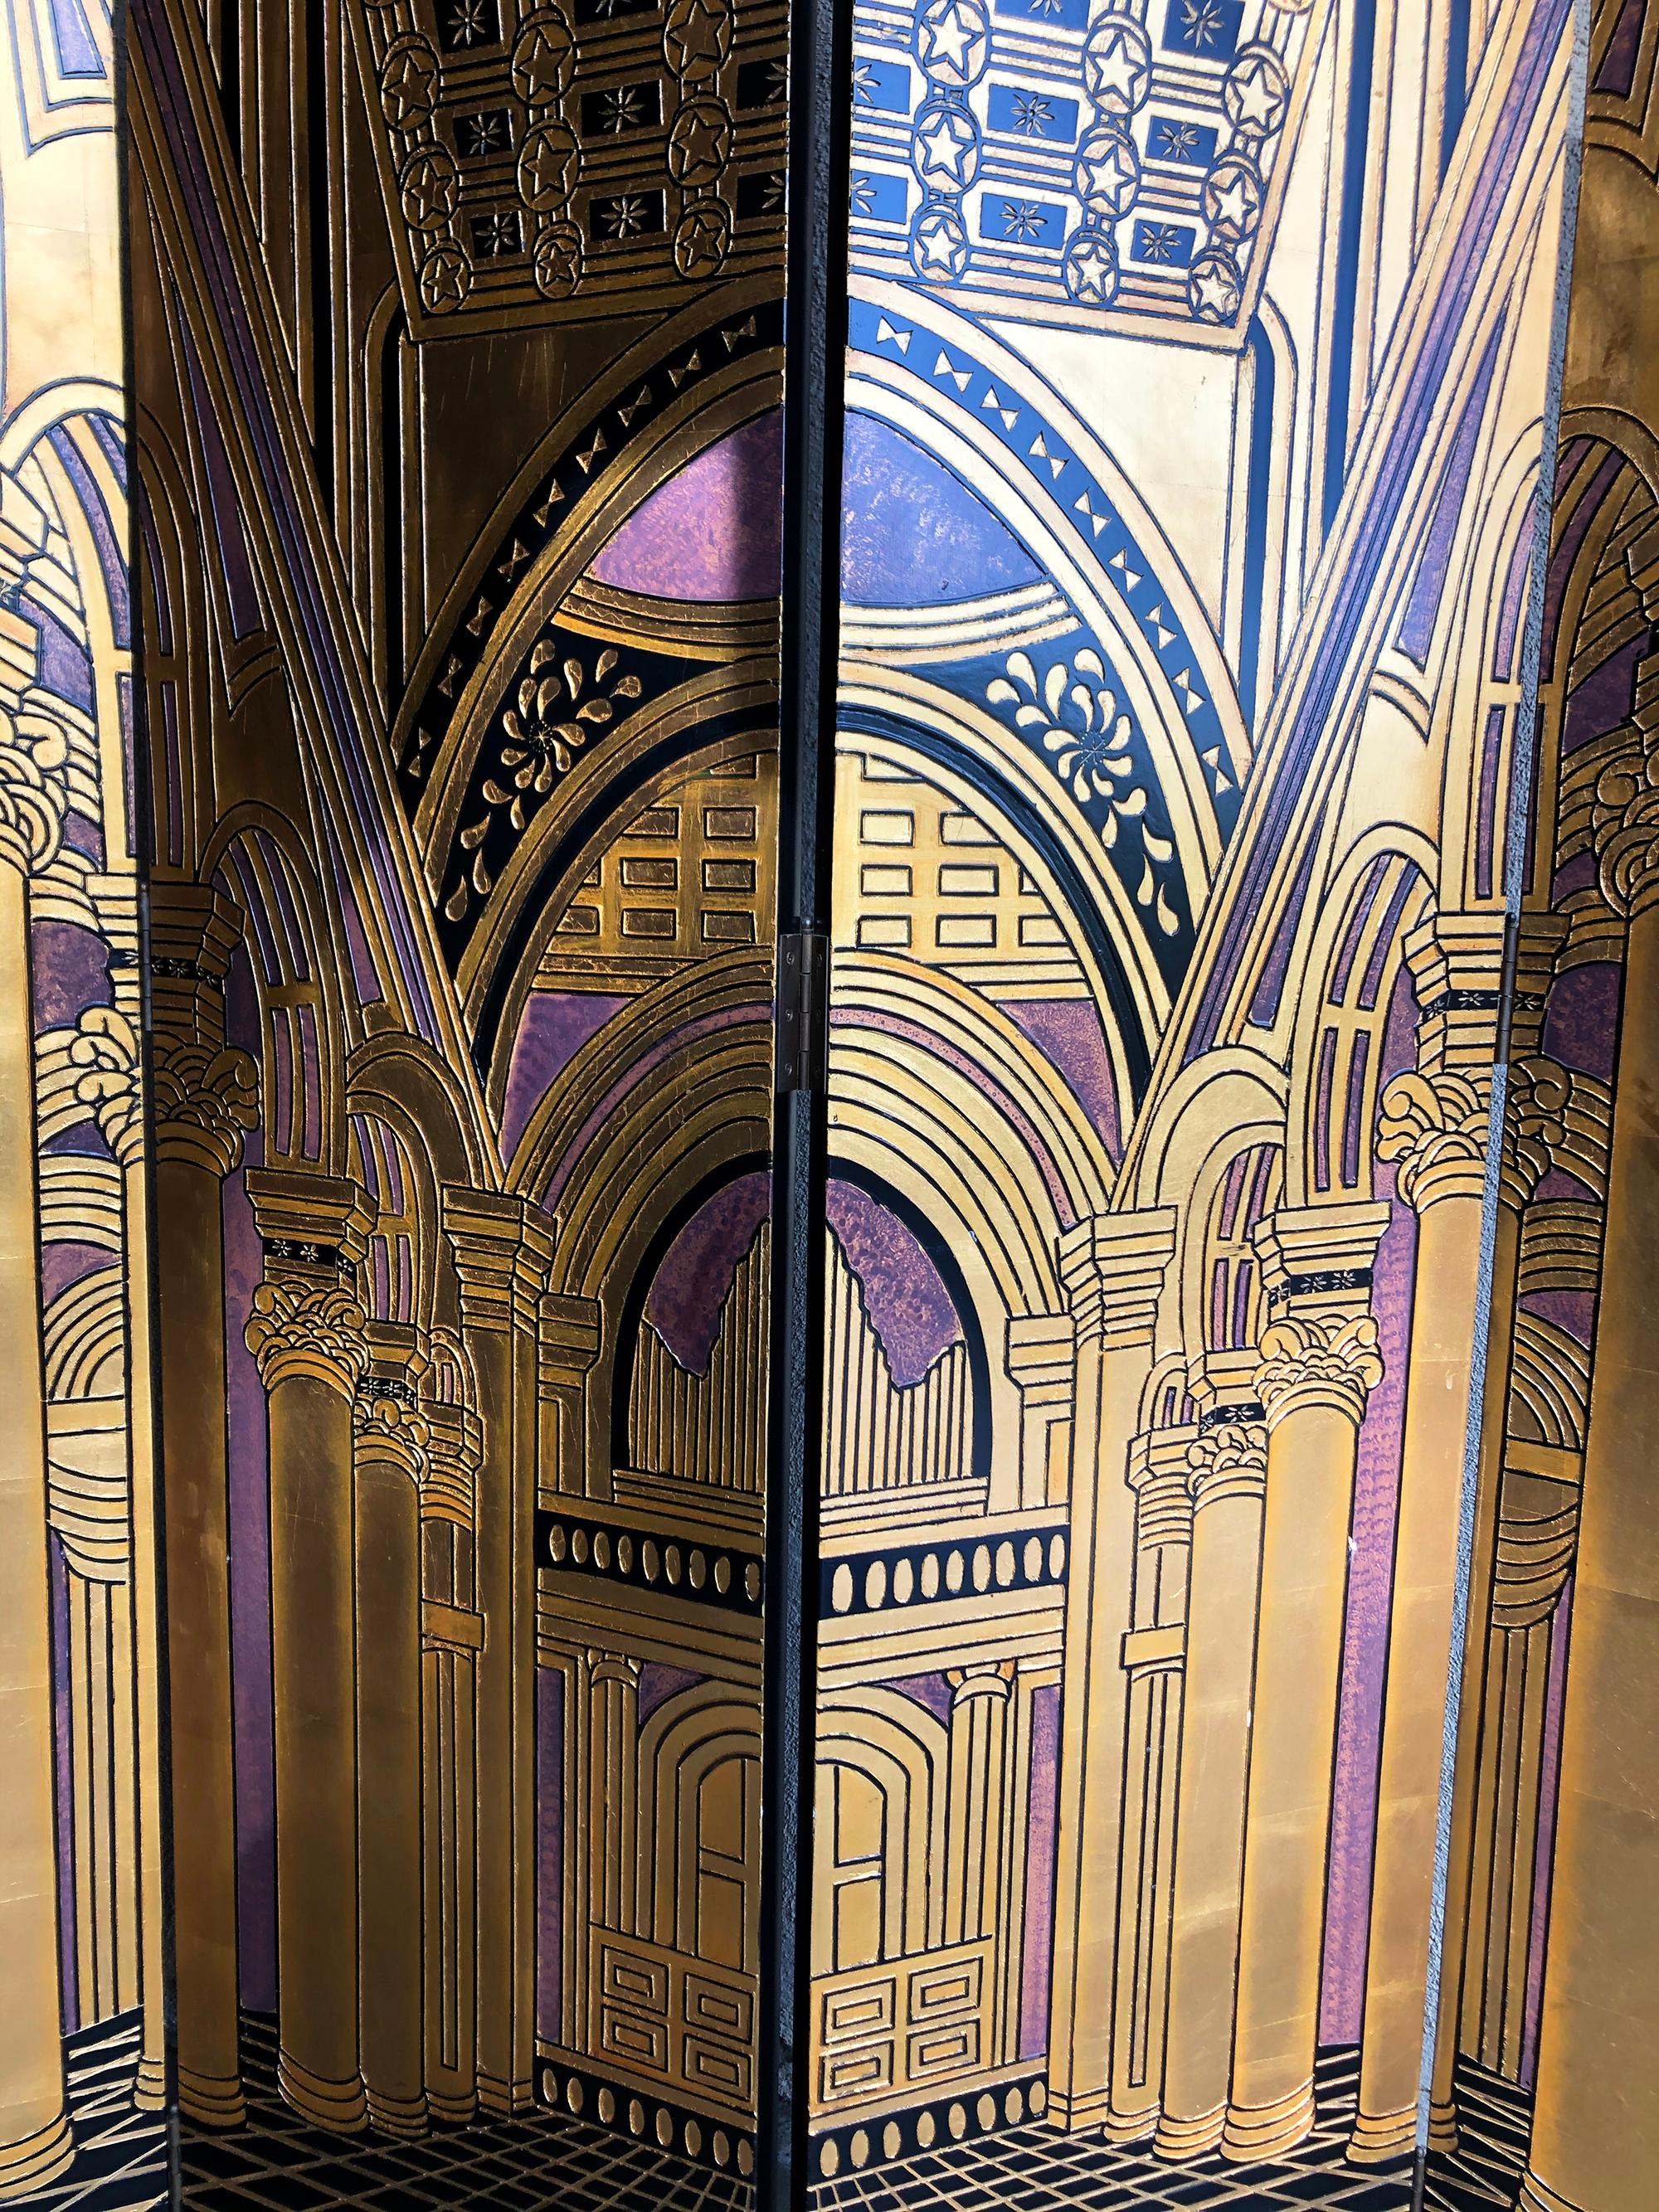 Large, four part folding wood screen with Classic architectural decoration produced by Fournier Decoration Paris from the 1970s-1980s. The décor is embossed with gold leaf gilding and textured paintings. Each screen panel measures 7' high by 16